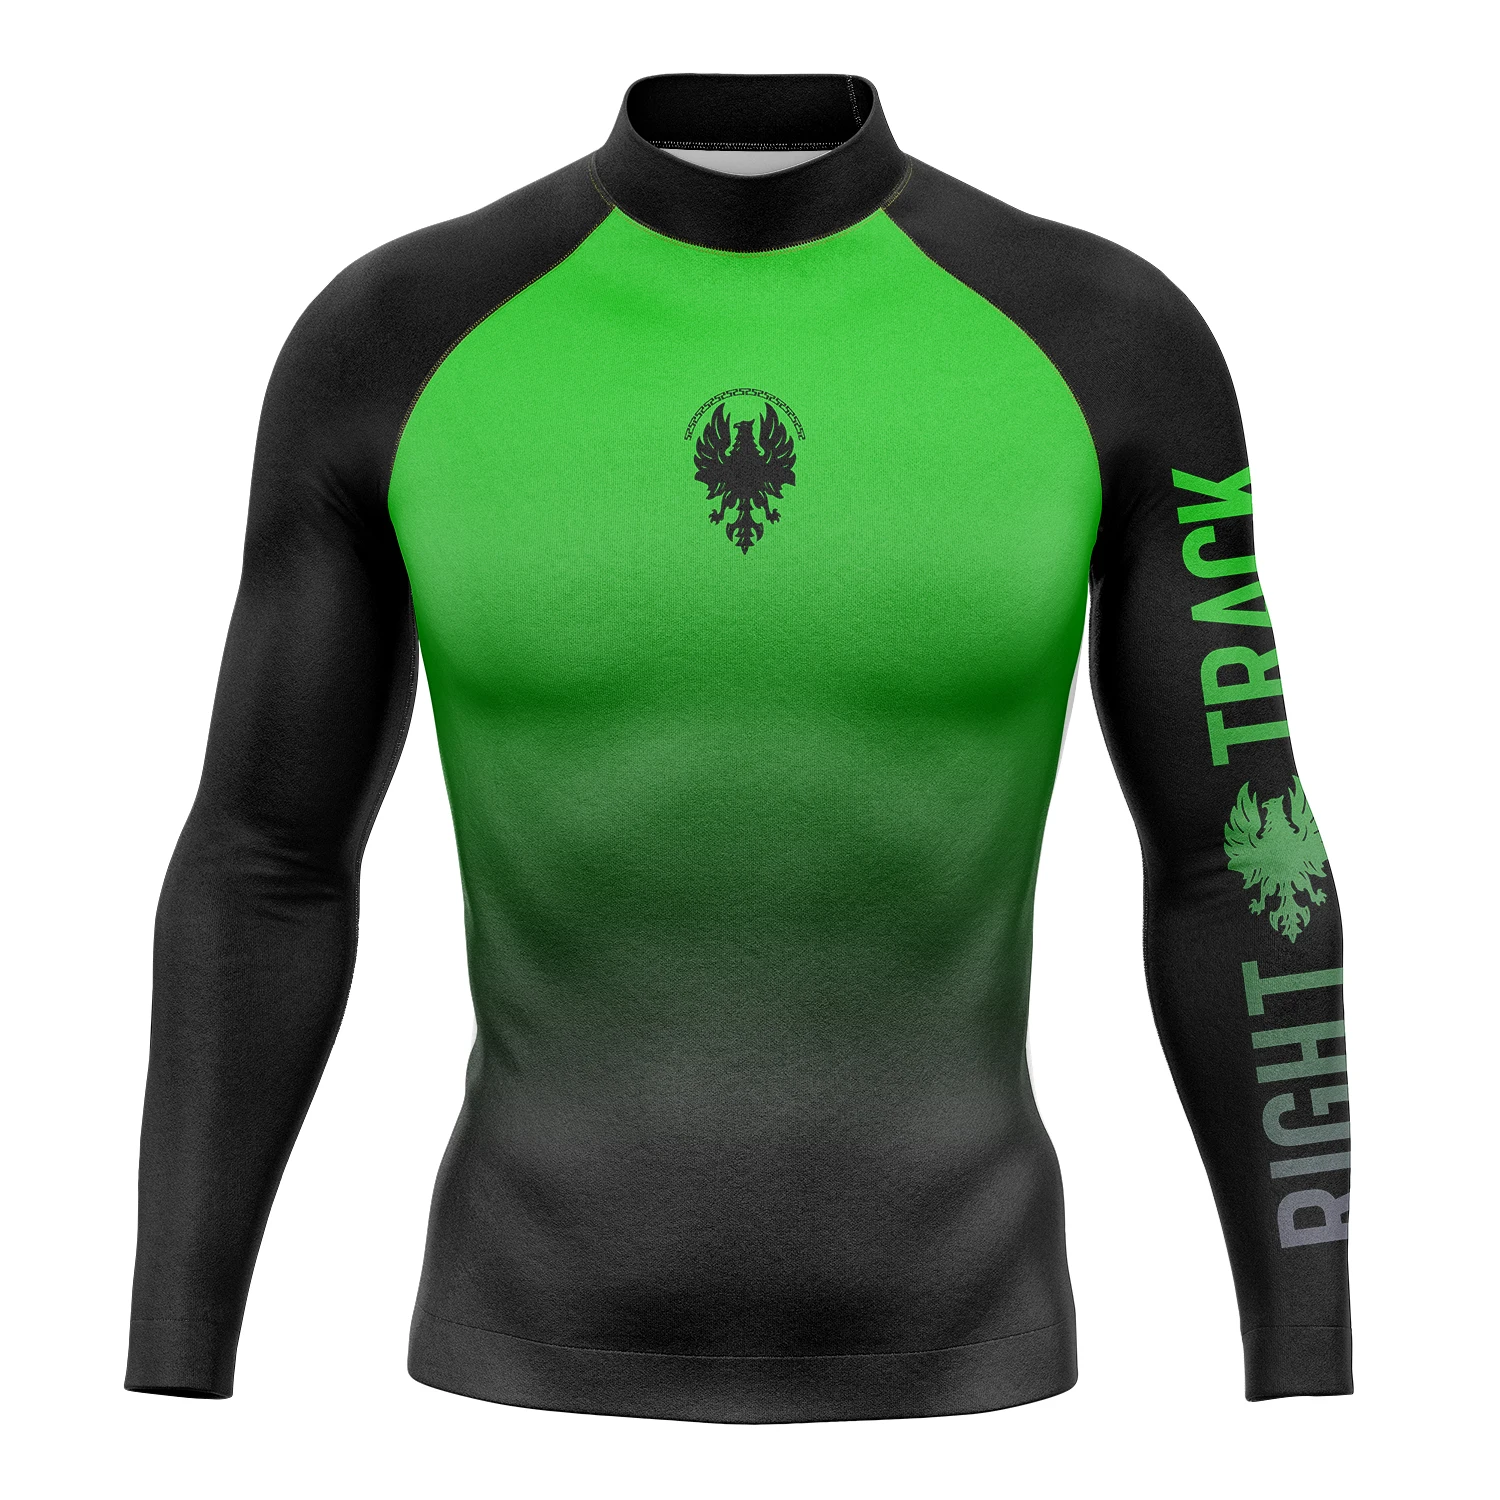 RIGHTRACK Men's Long Sleeve Surfing Shirt Rashguard UV Protection Lycra Swimwear UPF Diving Suit Gym Cheerful Clothes